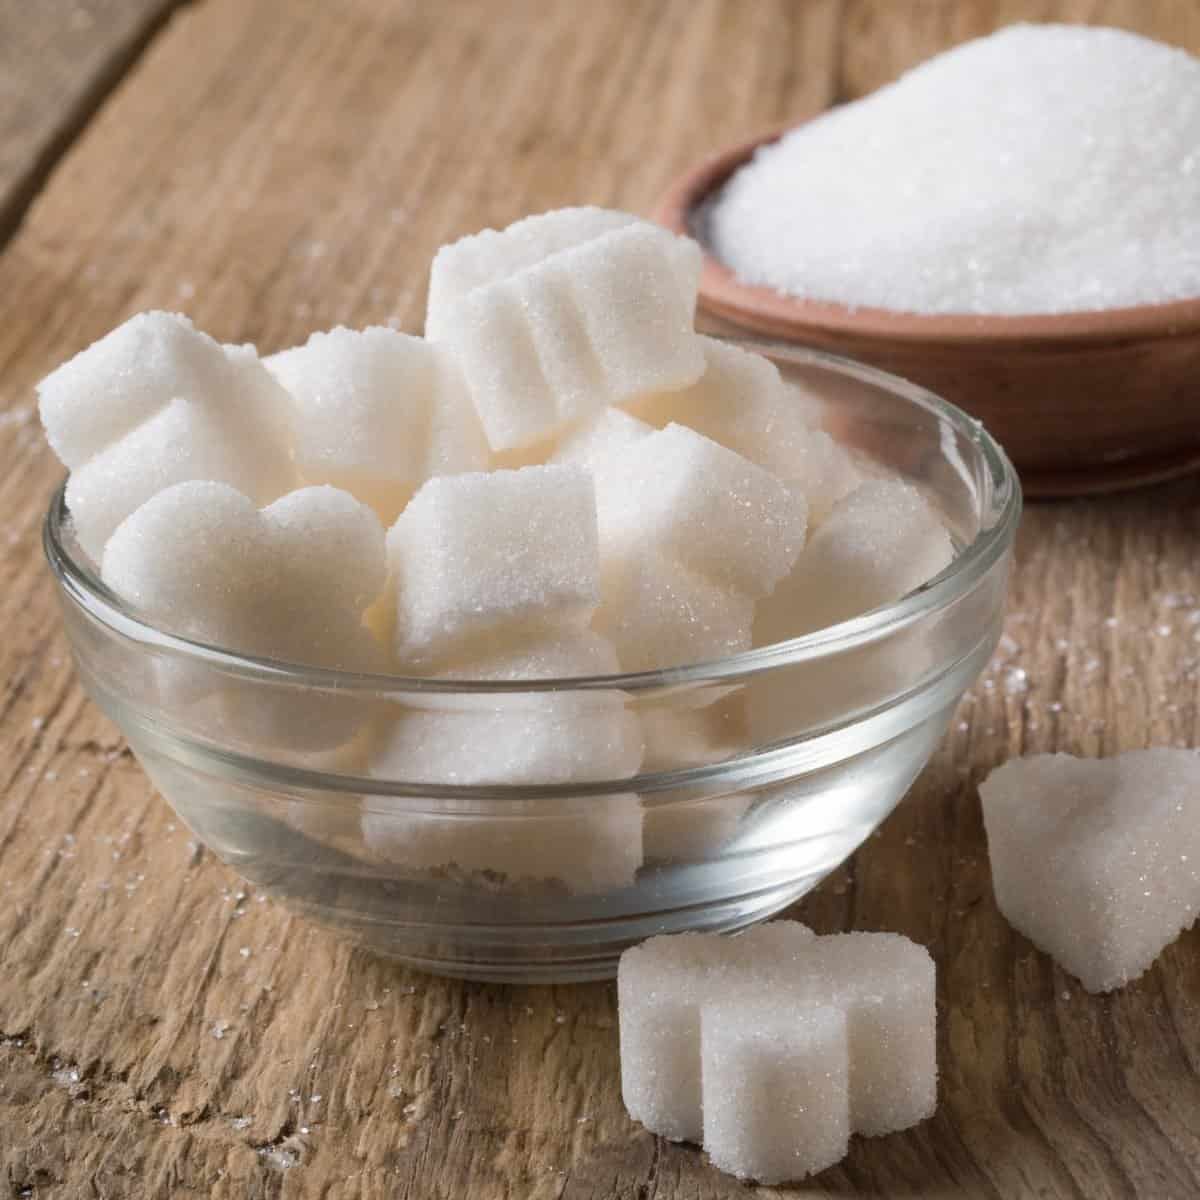 The Effects Of Sugar On Your Body And How To Cut Down On It!